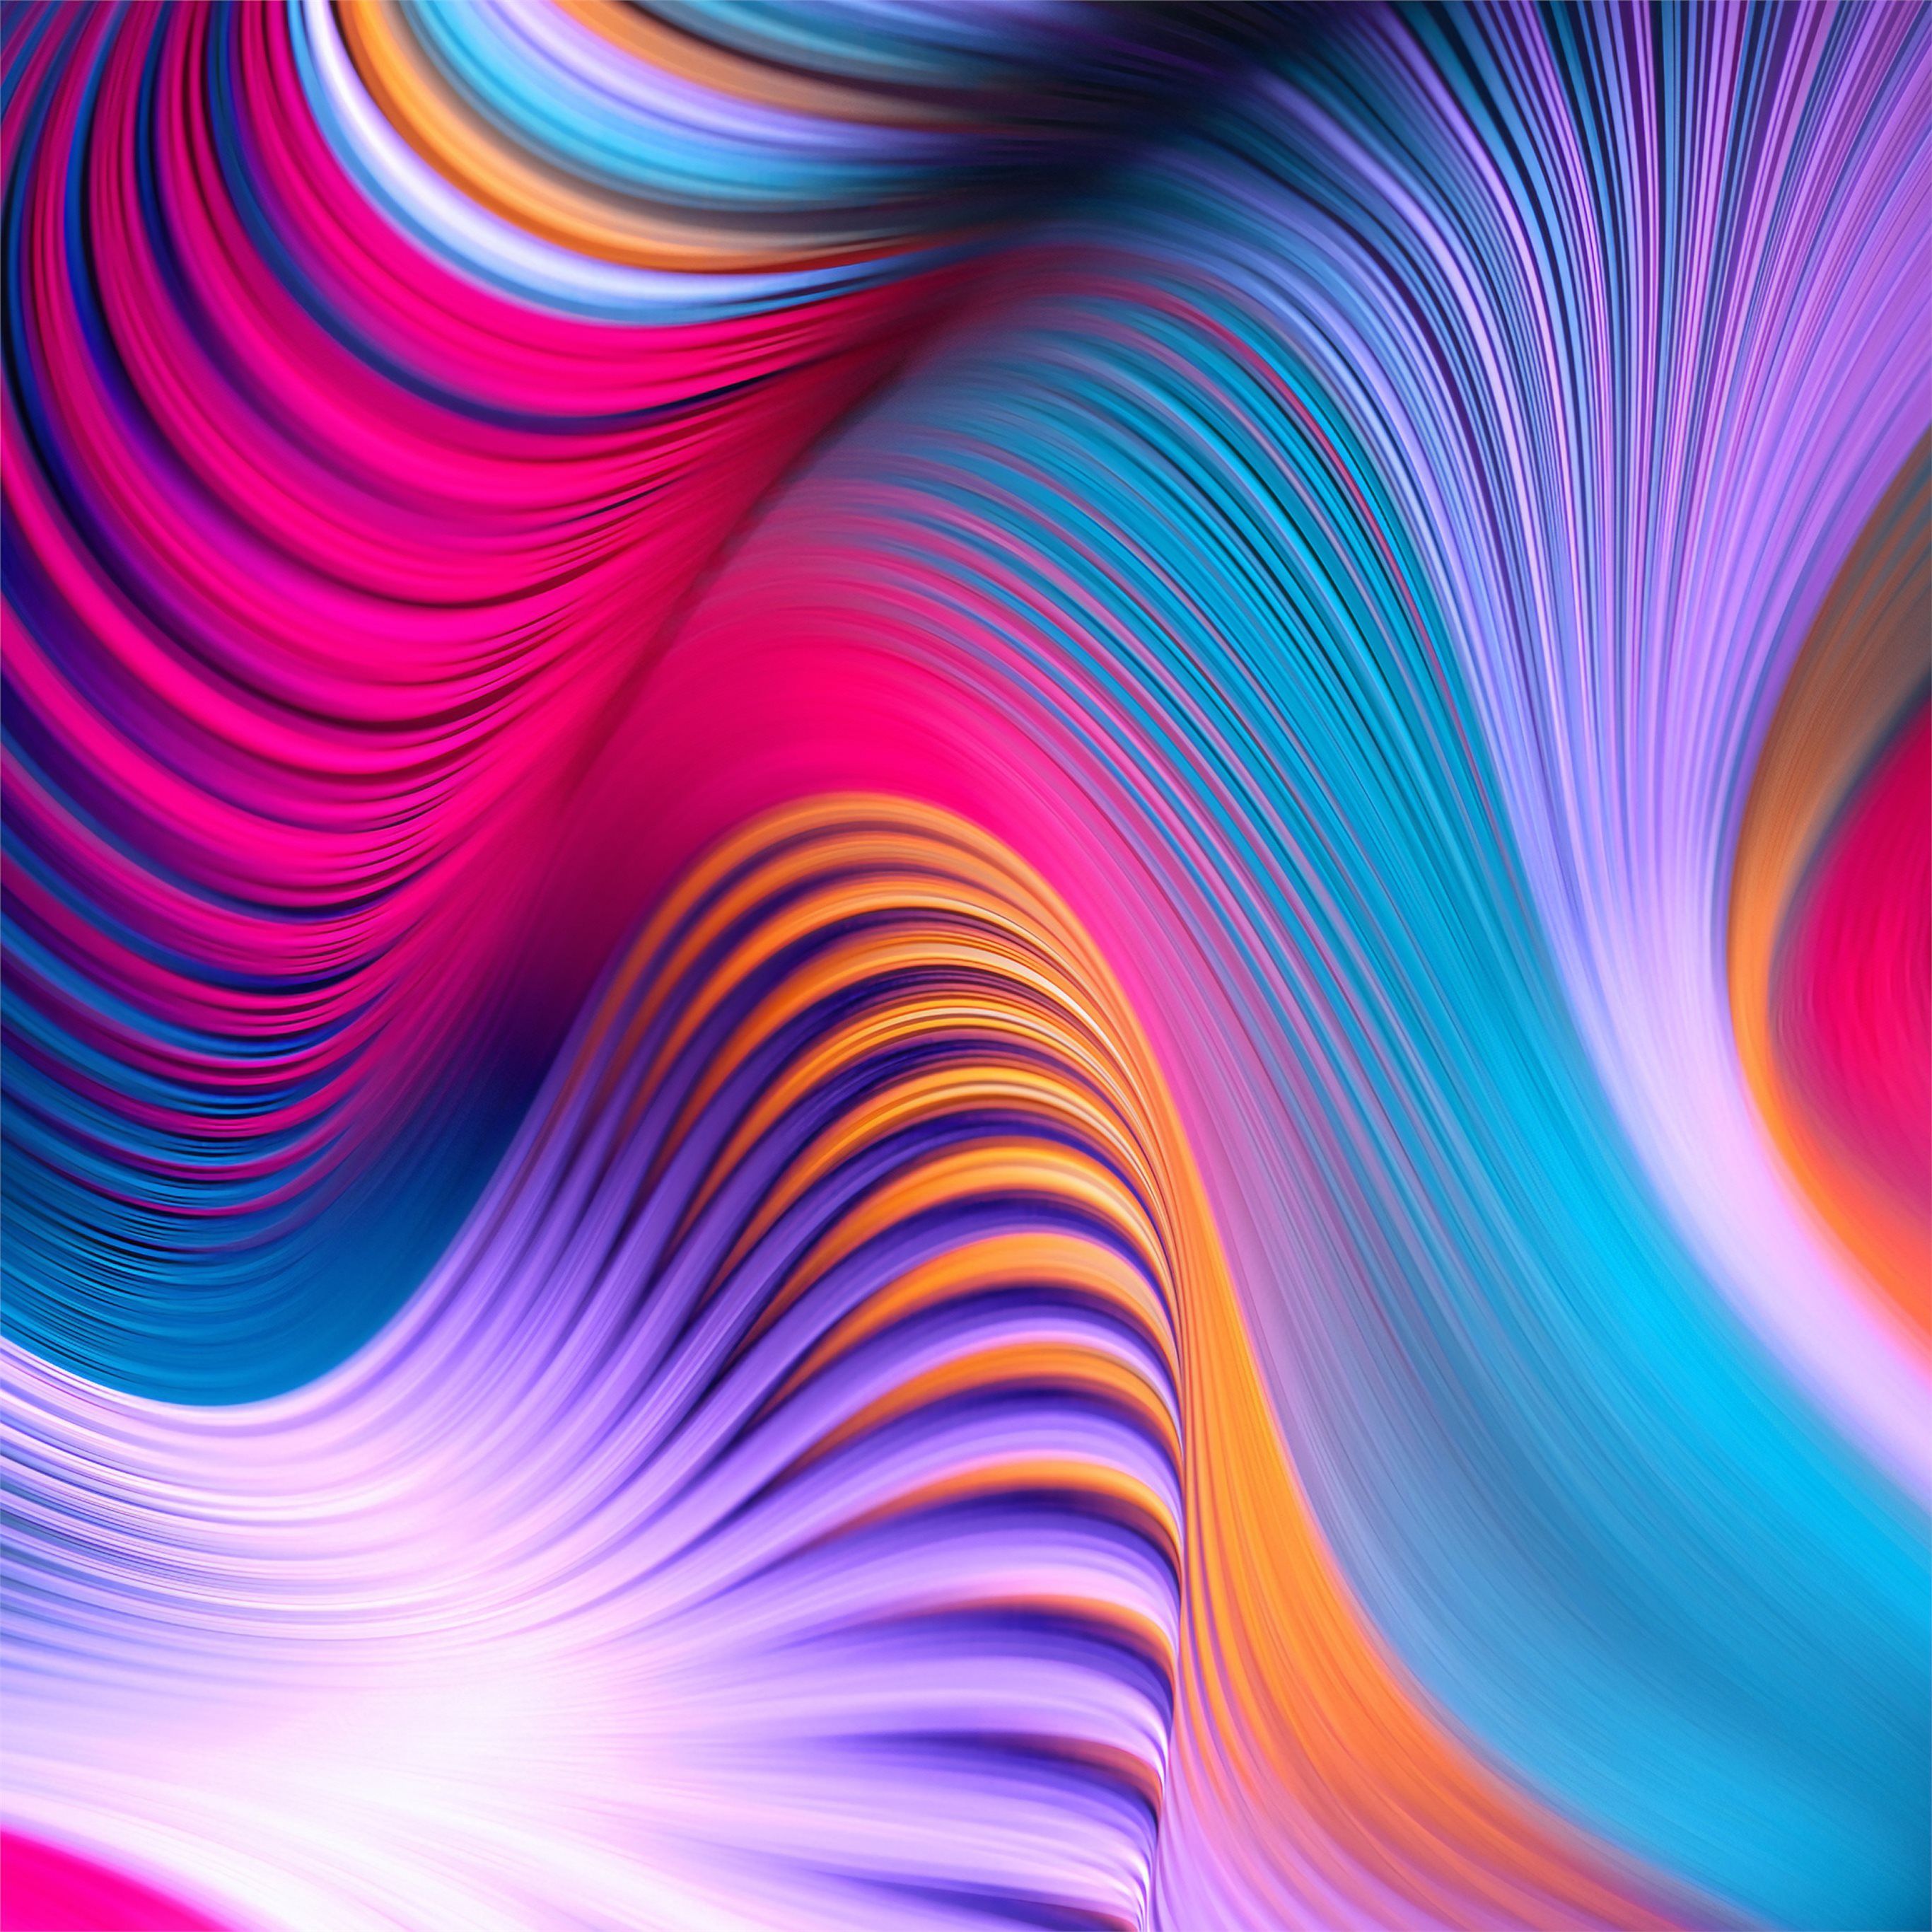 colorful movements of abstract art 4k iPad Pro Wallpaper Free Download